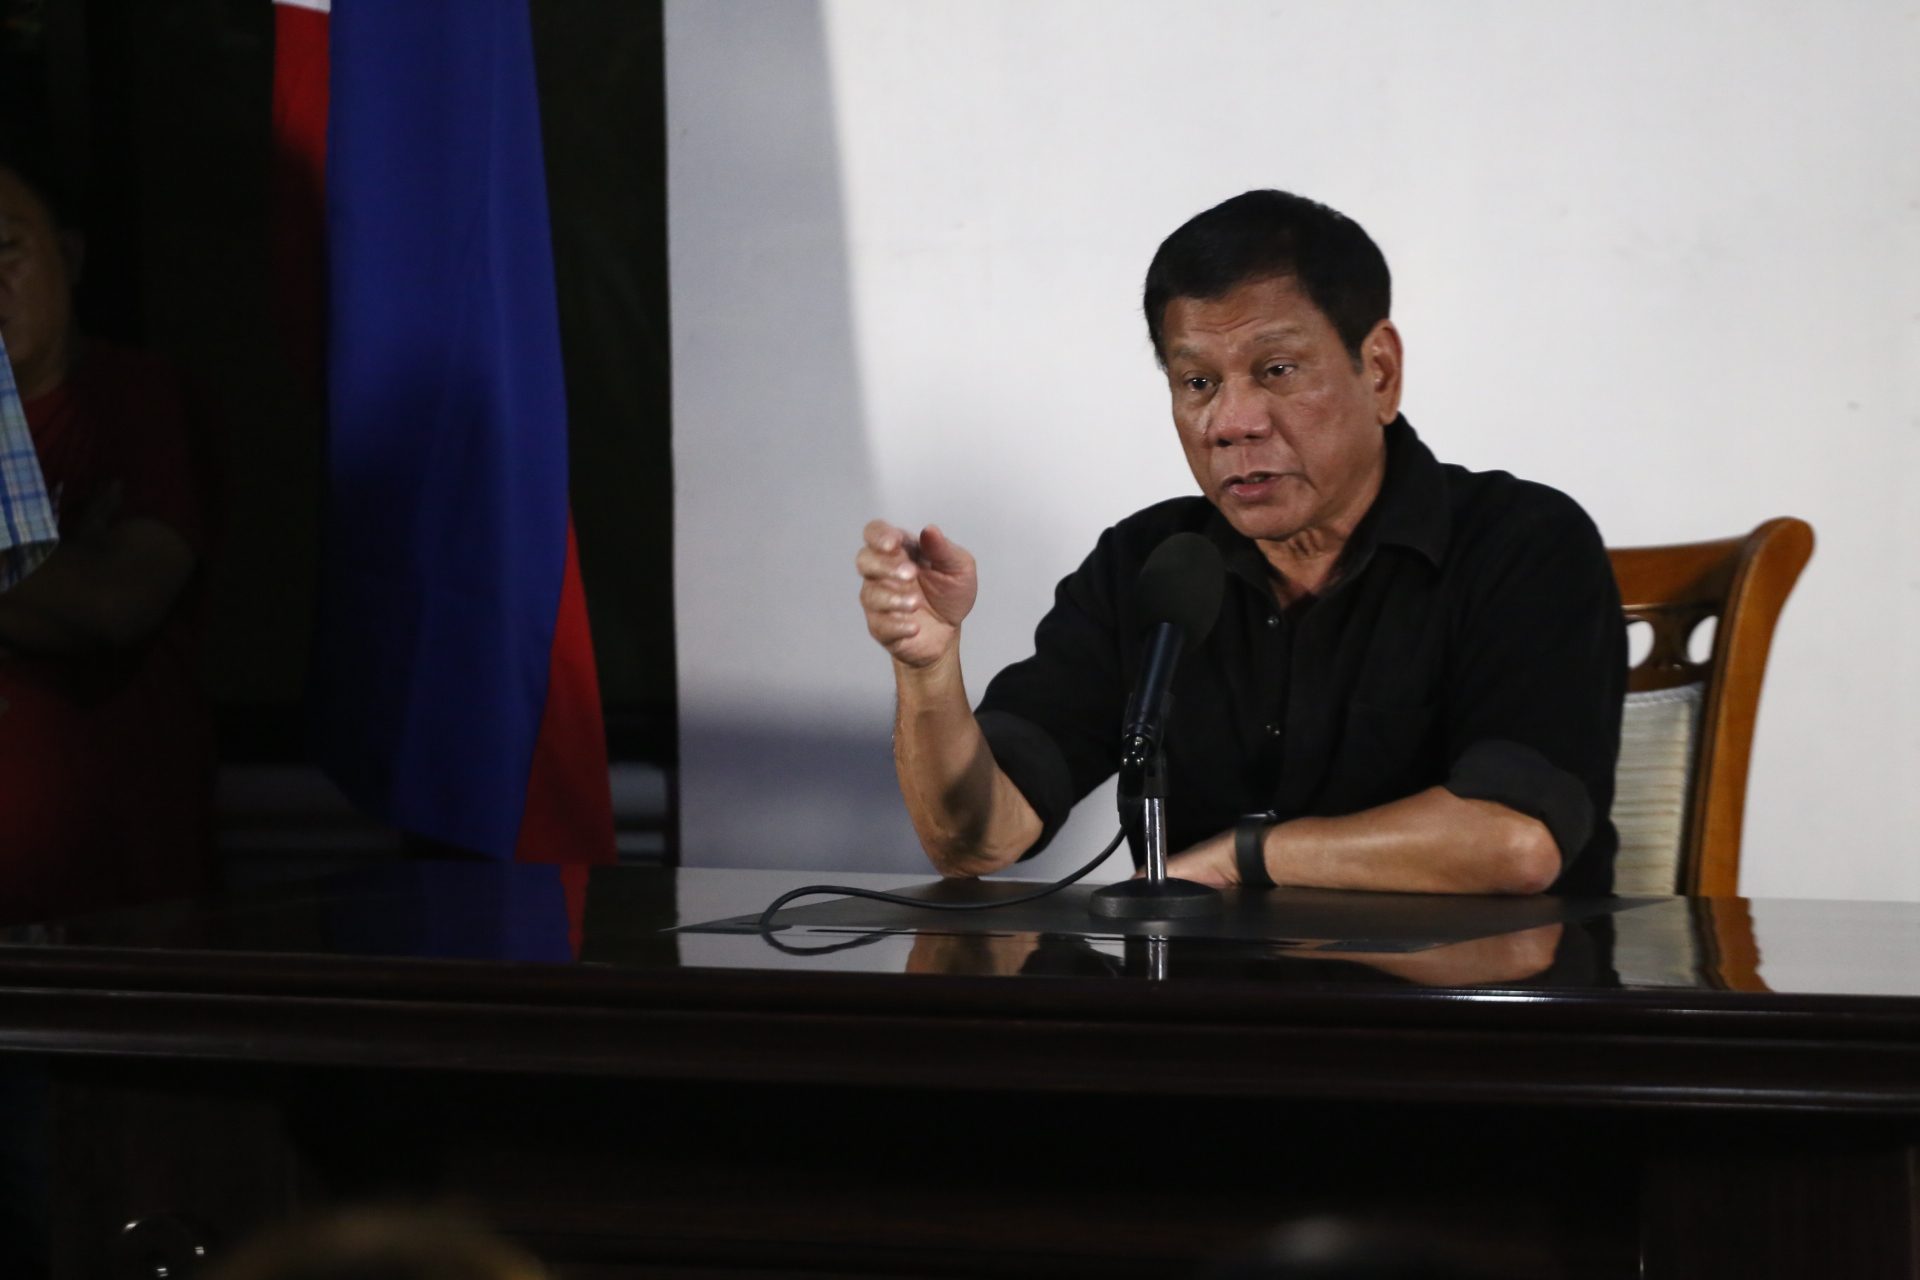 No more press briefings for President-elect Duterte